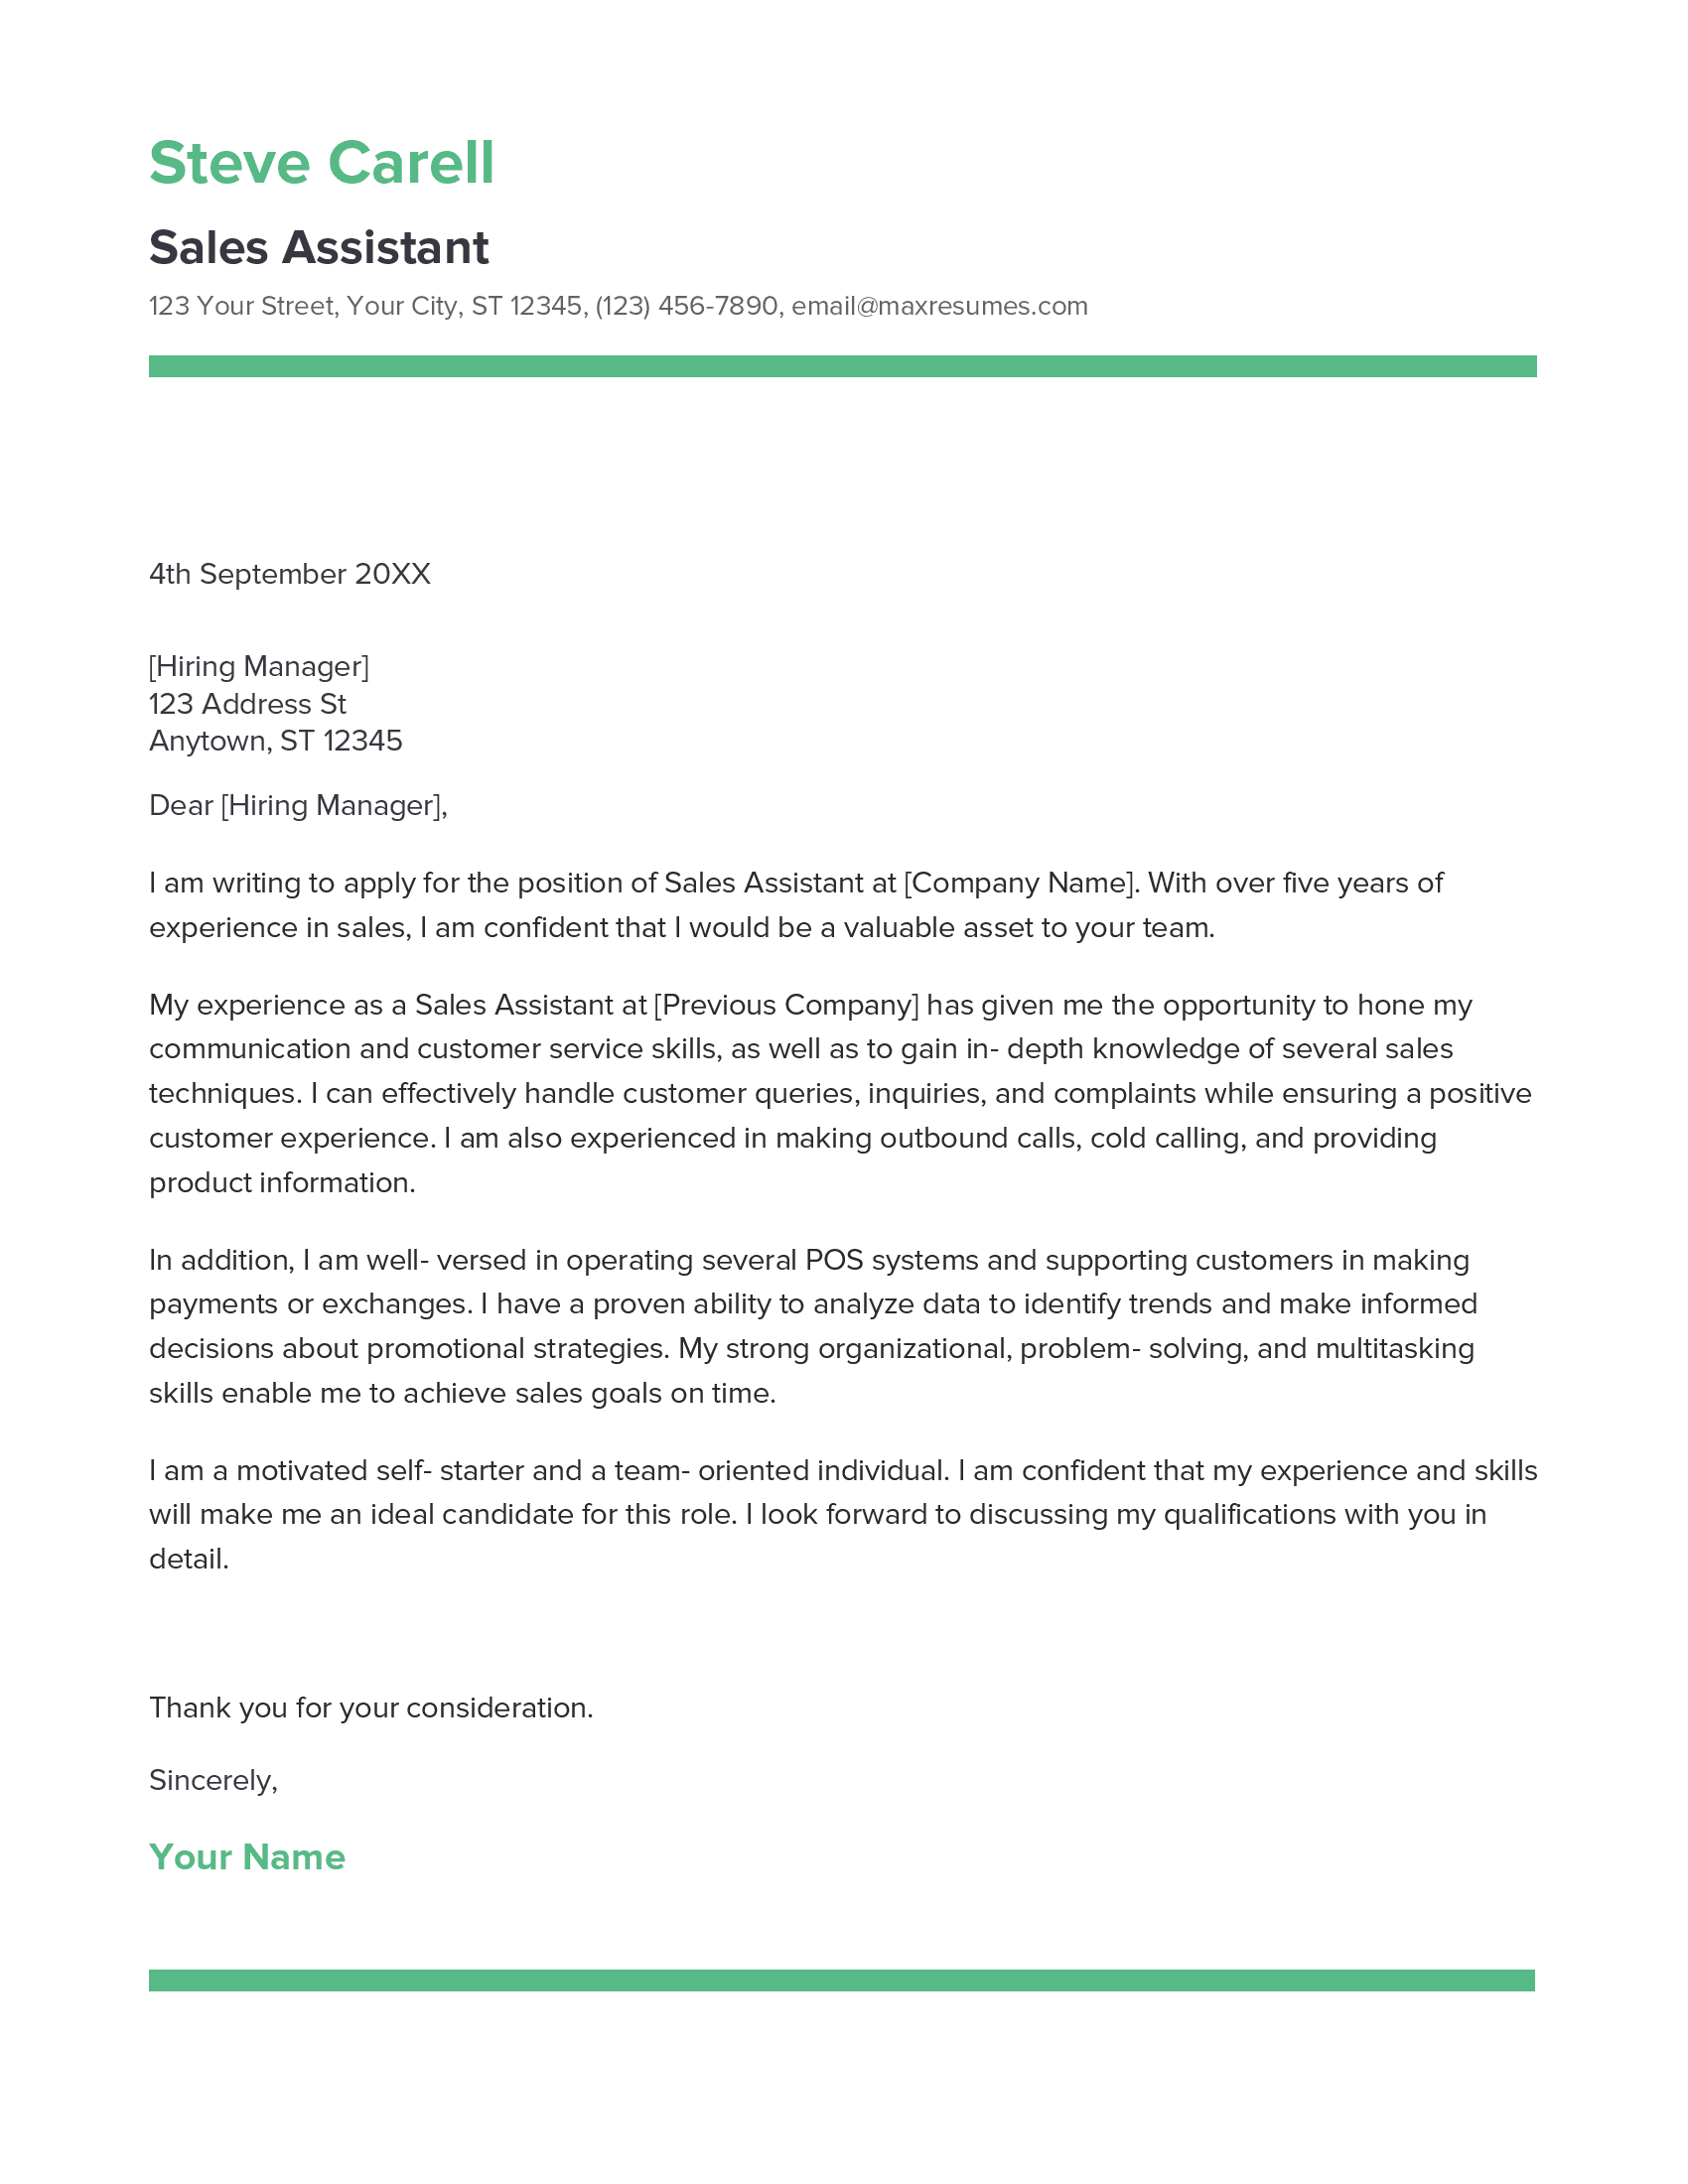 Sales Assistant Cover Letter Example